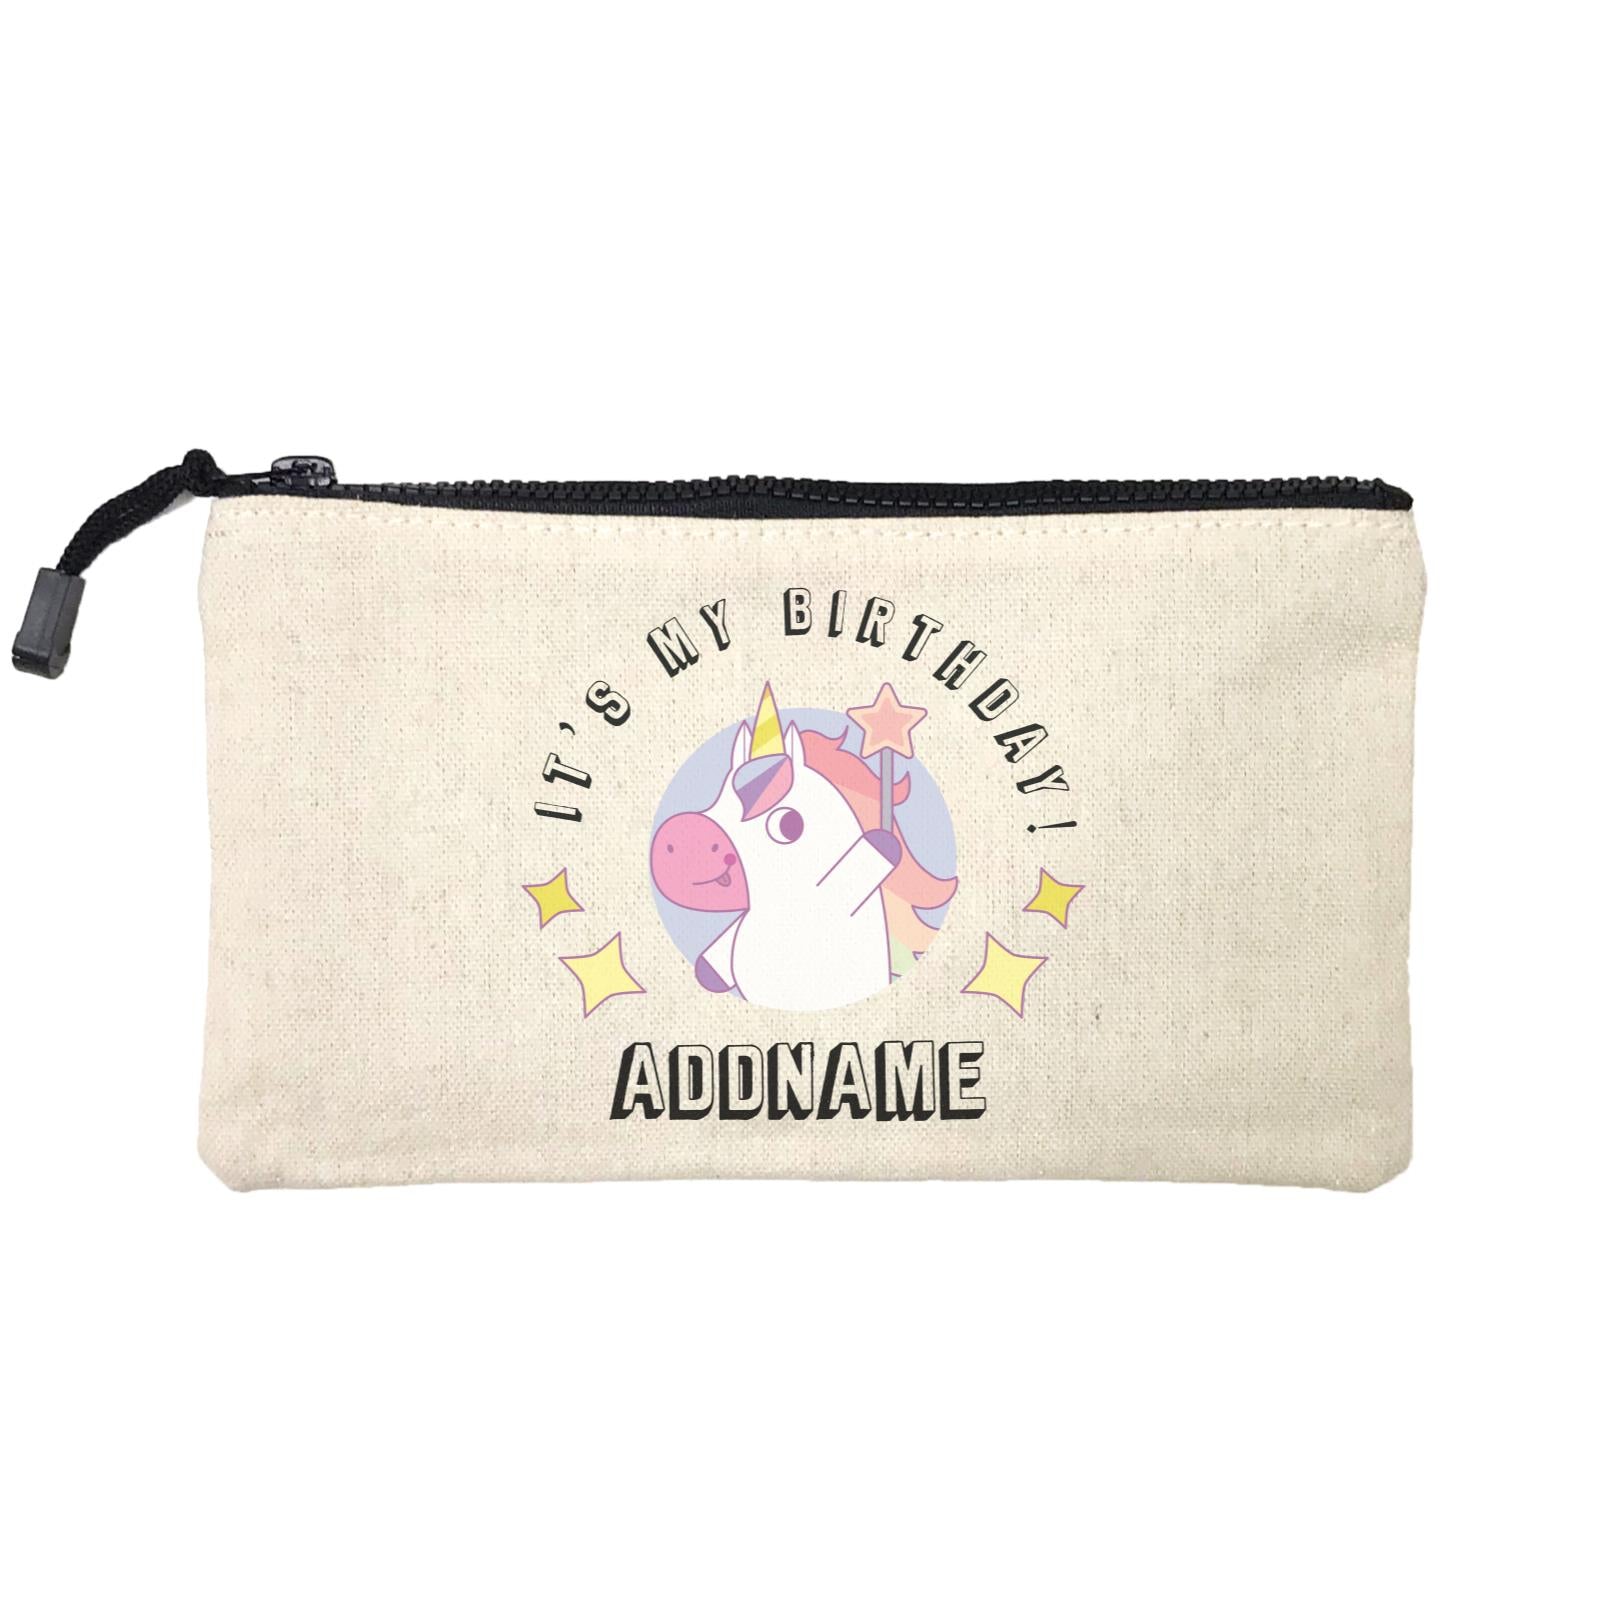 Birthday Unicorn Girl With Magic Wand It's My Birthday Addname Mini Accessories Stationery Pouch